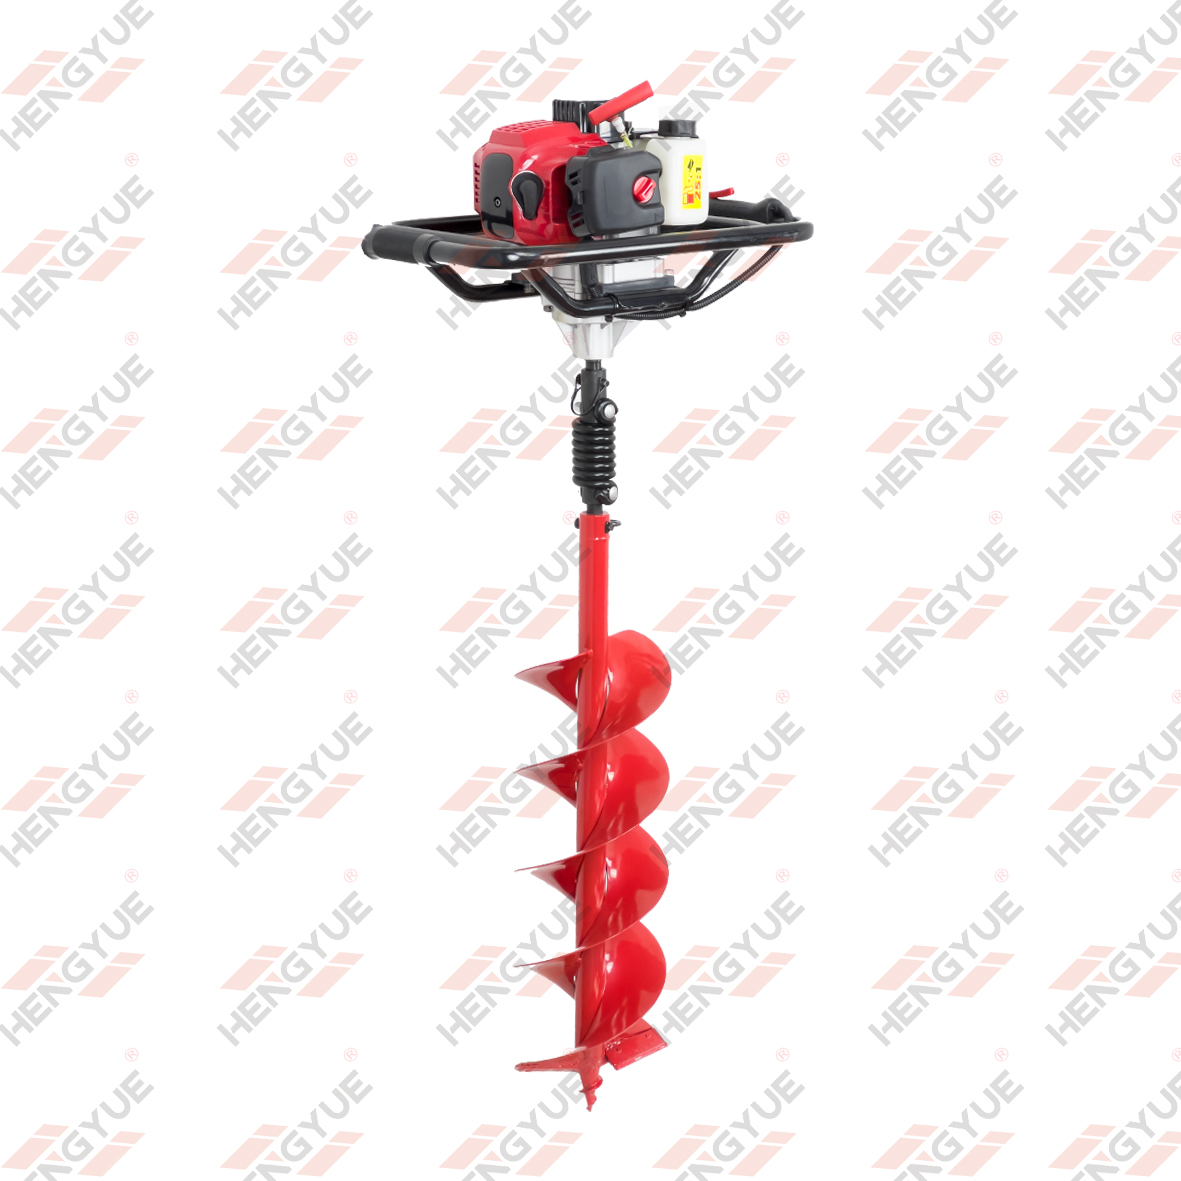 58cc Popular Hand Held Type Earth Auger 